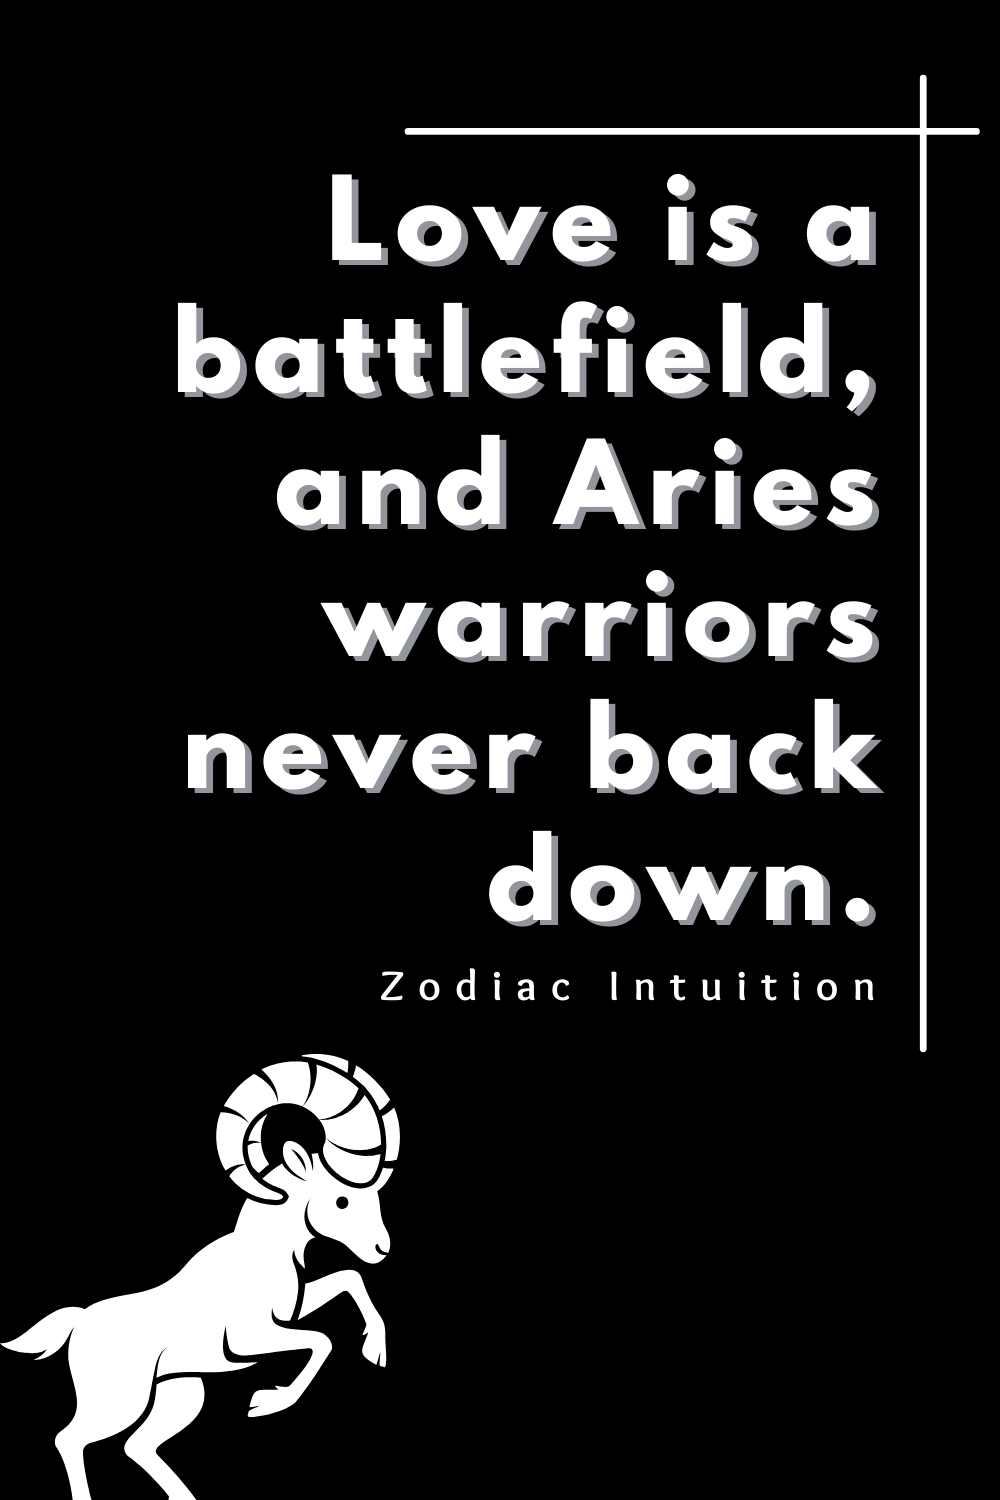 Love is a battlefield, and Aries warriors never back down.